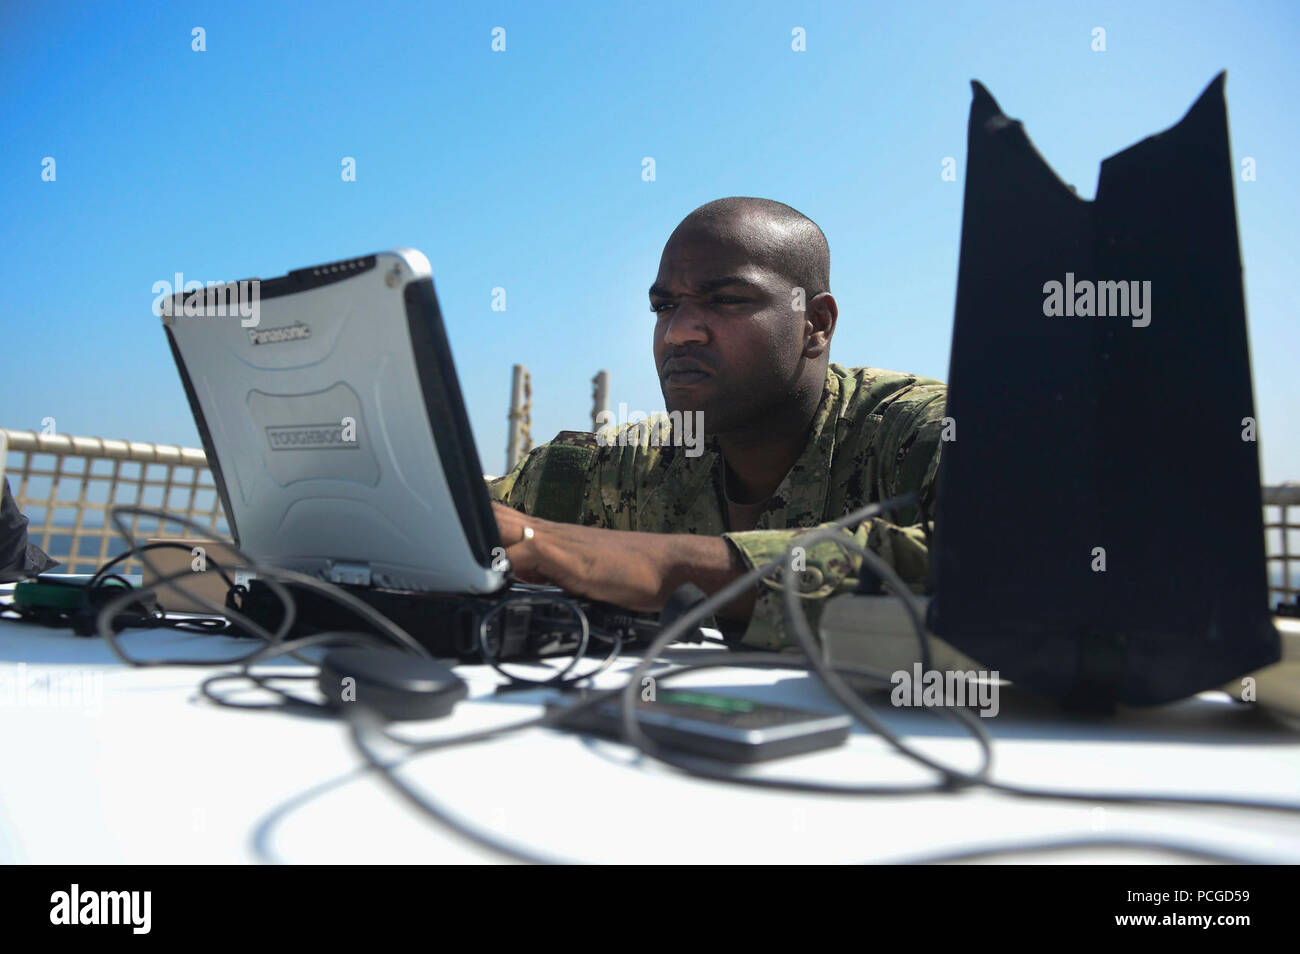 Chief Operations Specialist Dwayne Brown, from Brooklyn, N.Y., conducts unmanned aerial vehicle operations aboard the Military Sealift Command’s joint high-speed vessel USNS Spearhead (JHSV 1) Jan 26, 2015. Spearhead is on a scheduled deployment to the U.S. 6th Fleet area of operations in support of the international collaborative capacity-building program Africa Partnership Station. Stock Photo